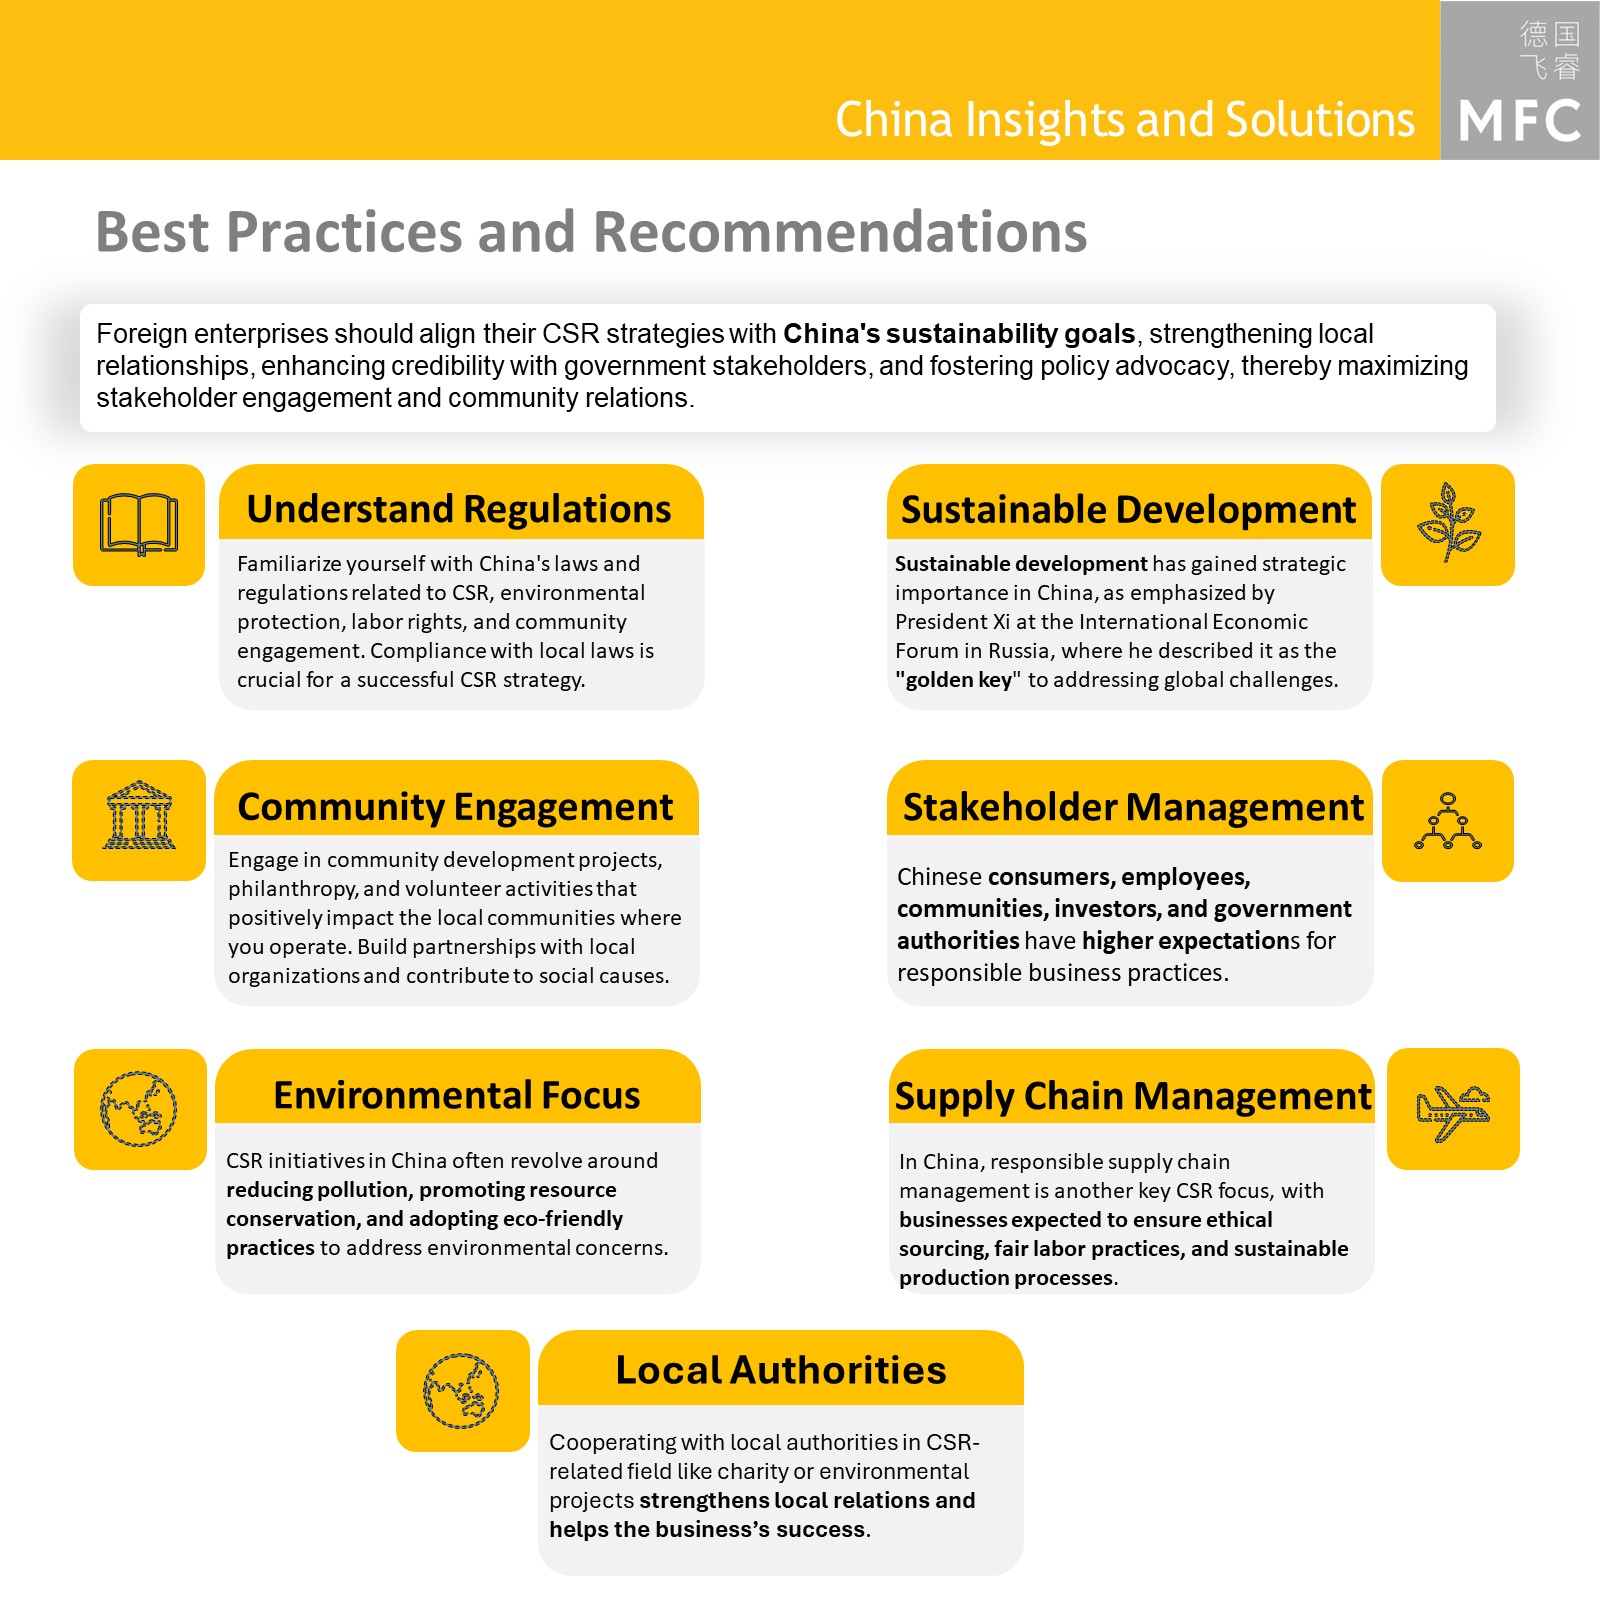 CSR Best Practices and Recommendations: Understand Regulations, Community Engagement, Environmental Focus, Sustainable Development, Stakeholder Management, Supply Chain Management, Local Authorities